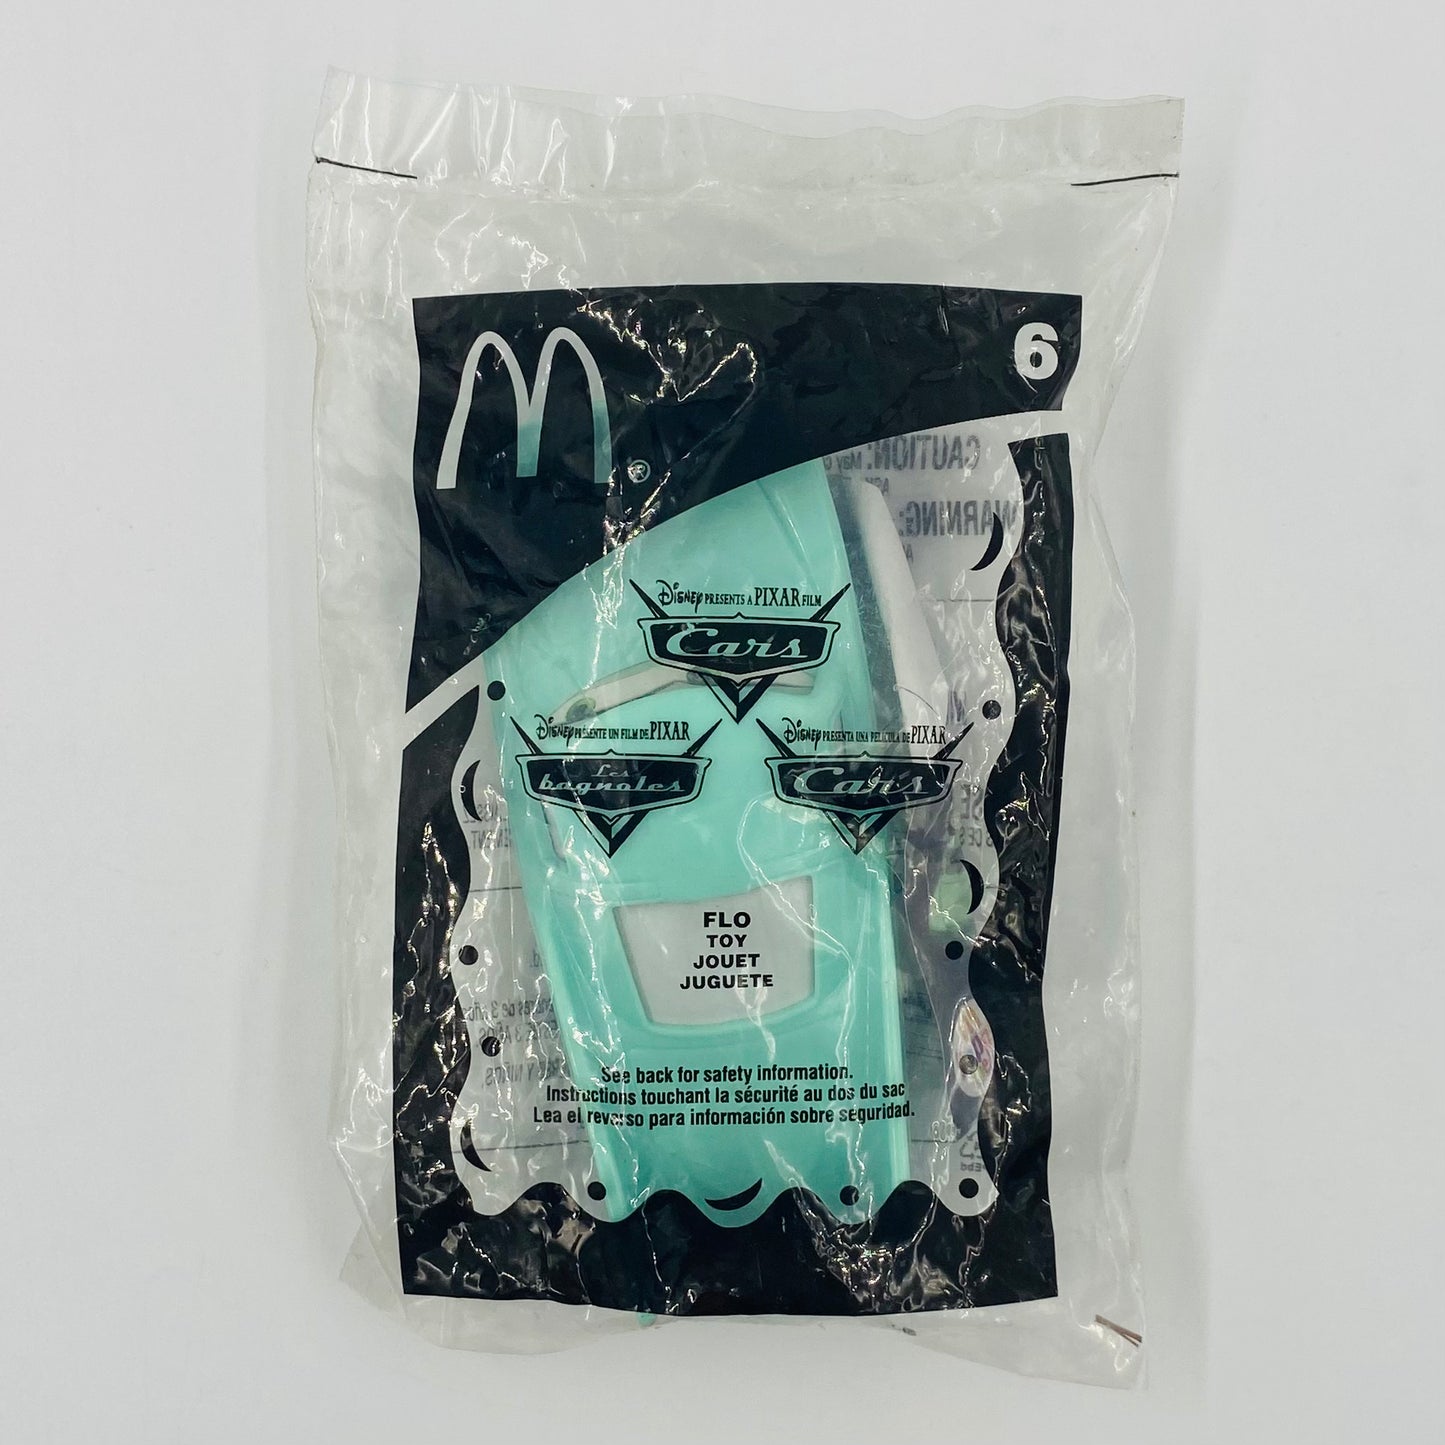 Cars Flo McDonald's Happy Meal toy (2006) bagged